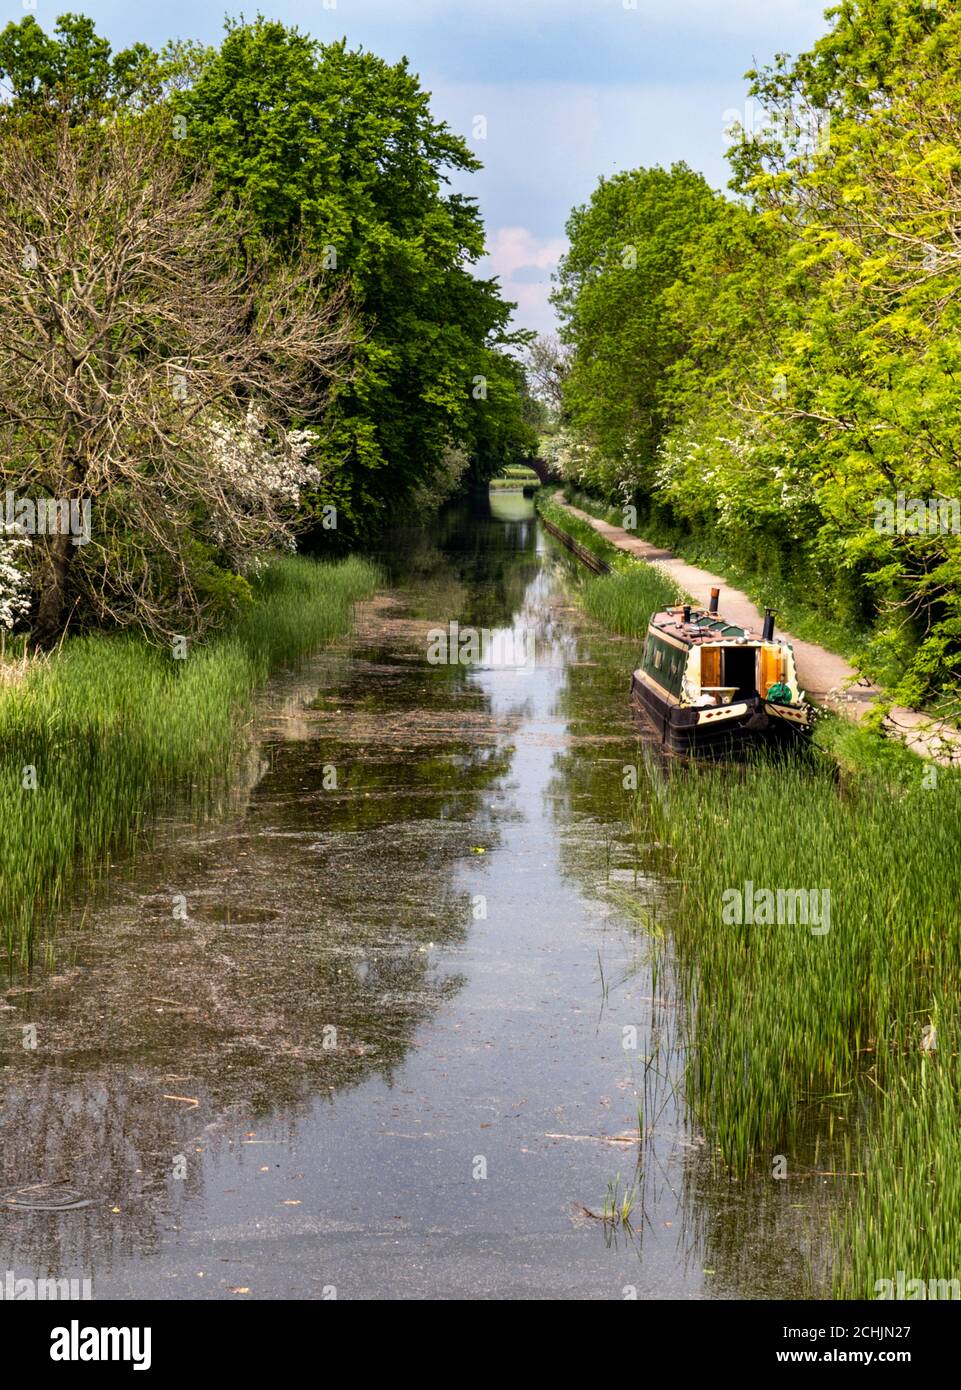 A barge or narrowboat on the Leicester Line of the Grand Union Canal near Foxton Locks, Leicestershire, England, UK Stock Photo